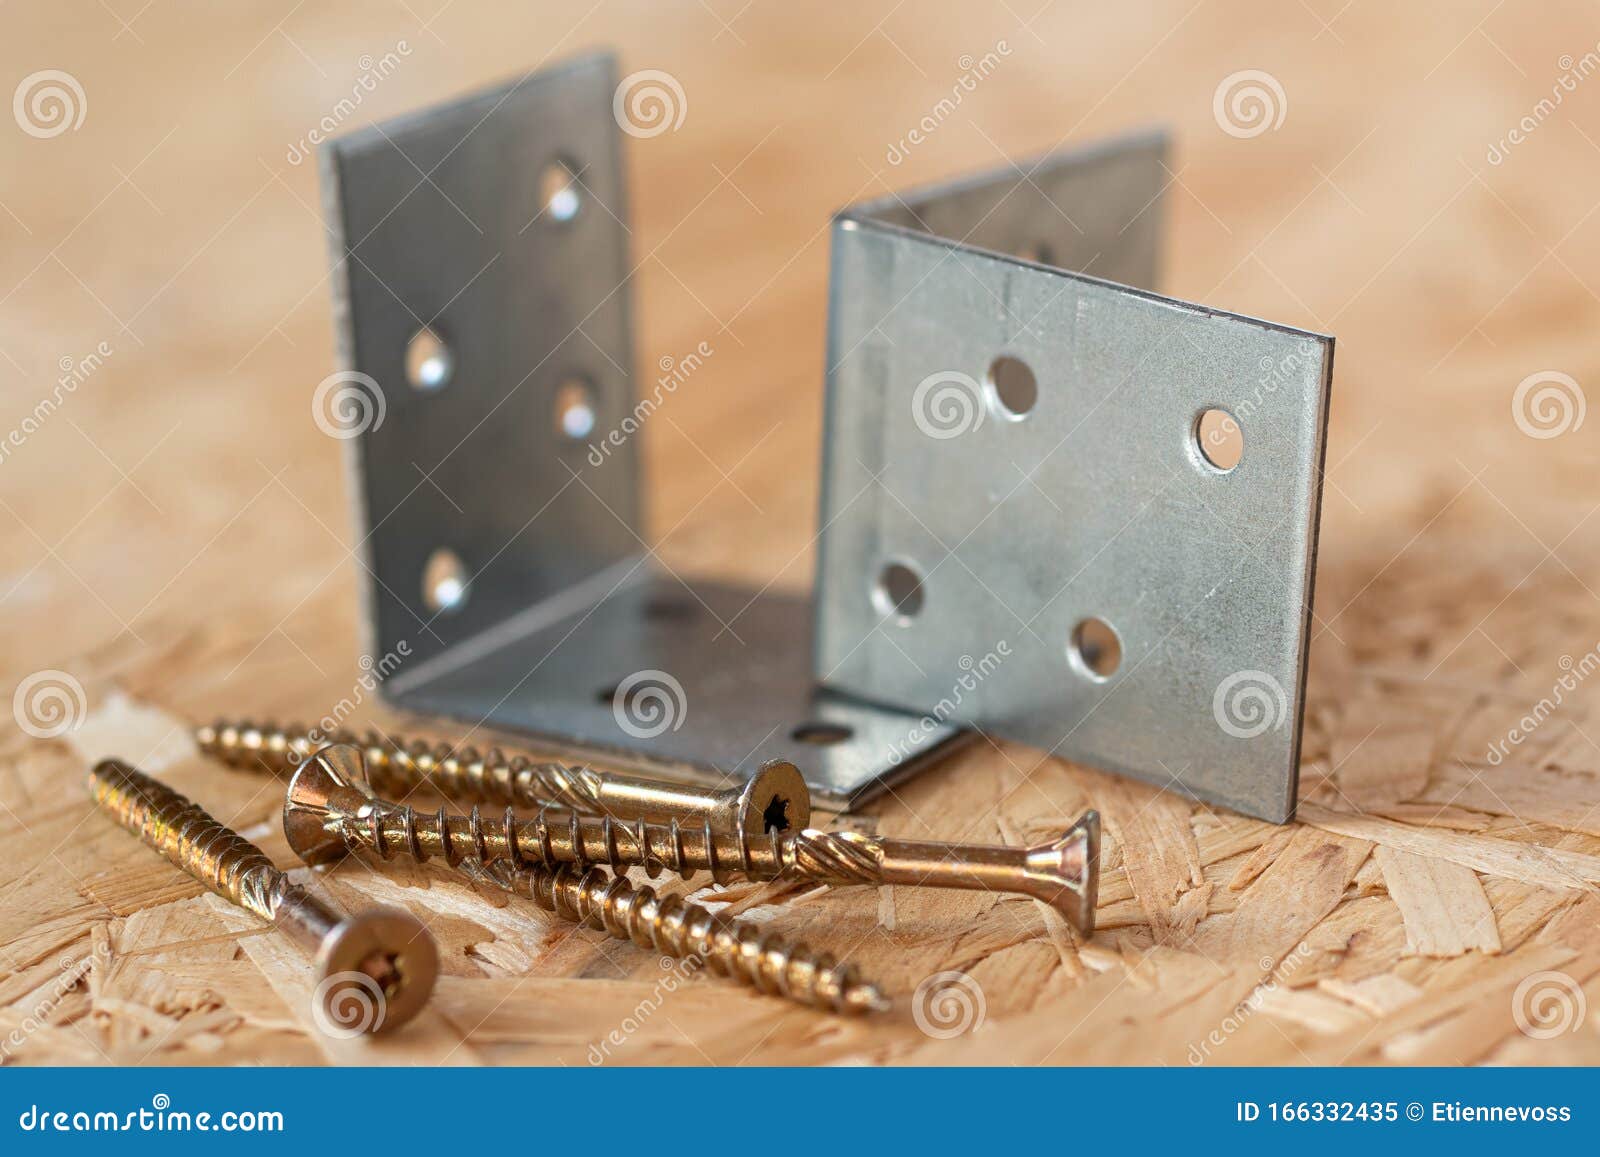 two galvanized angle brackets and self drilling screws lying on chip board. blurred background